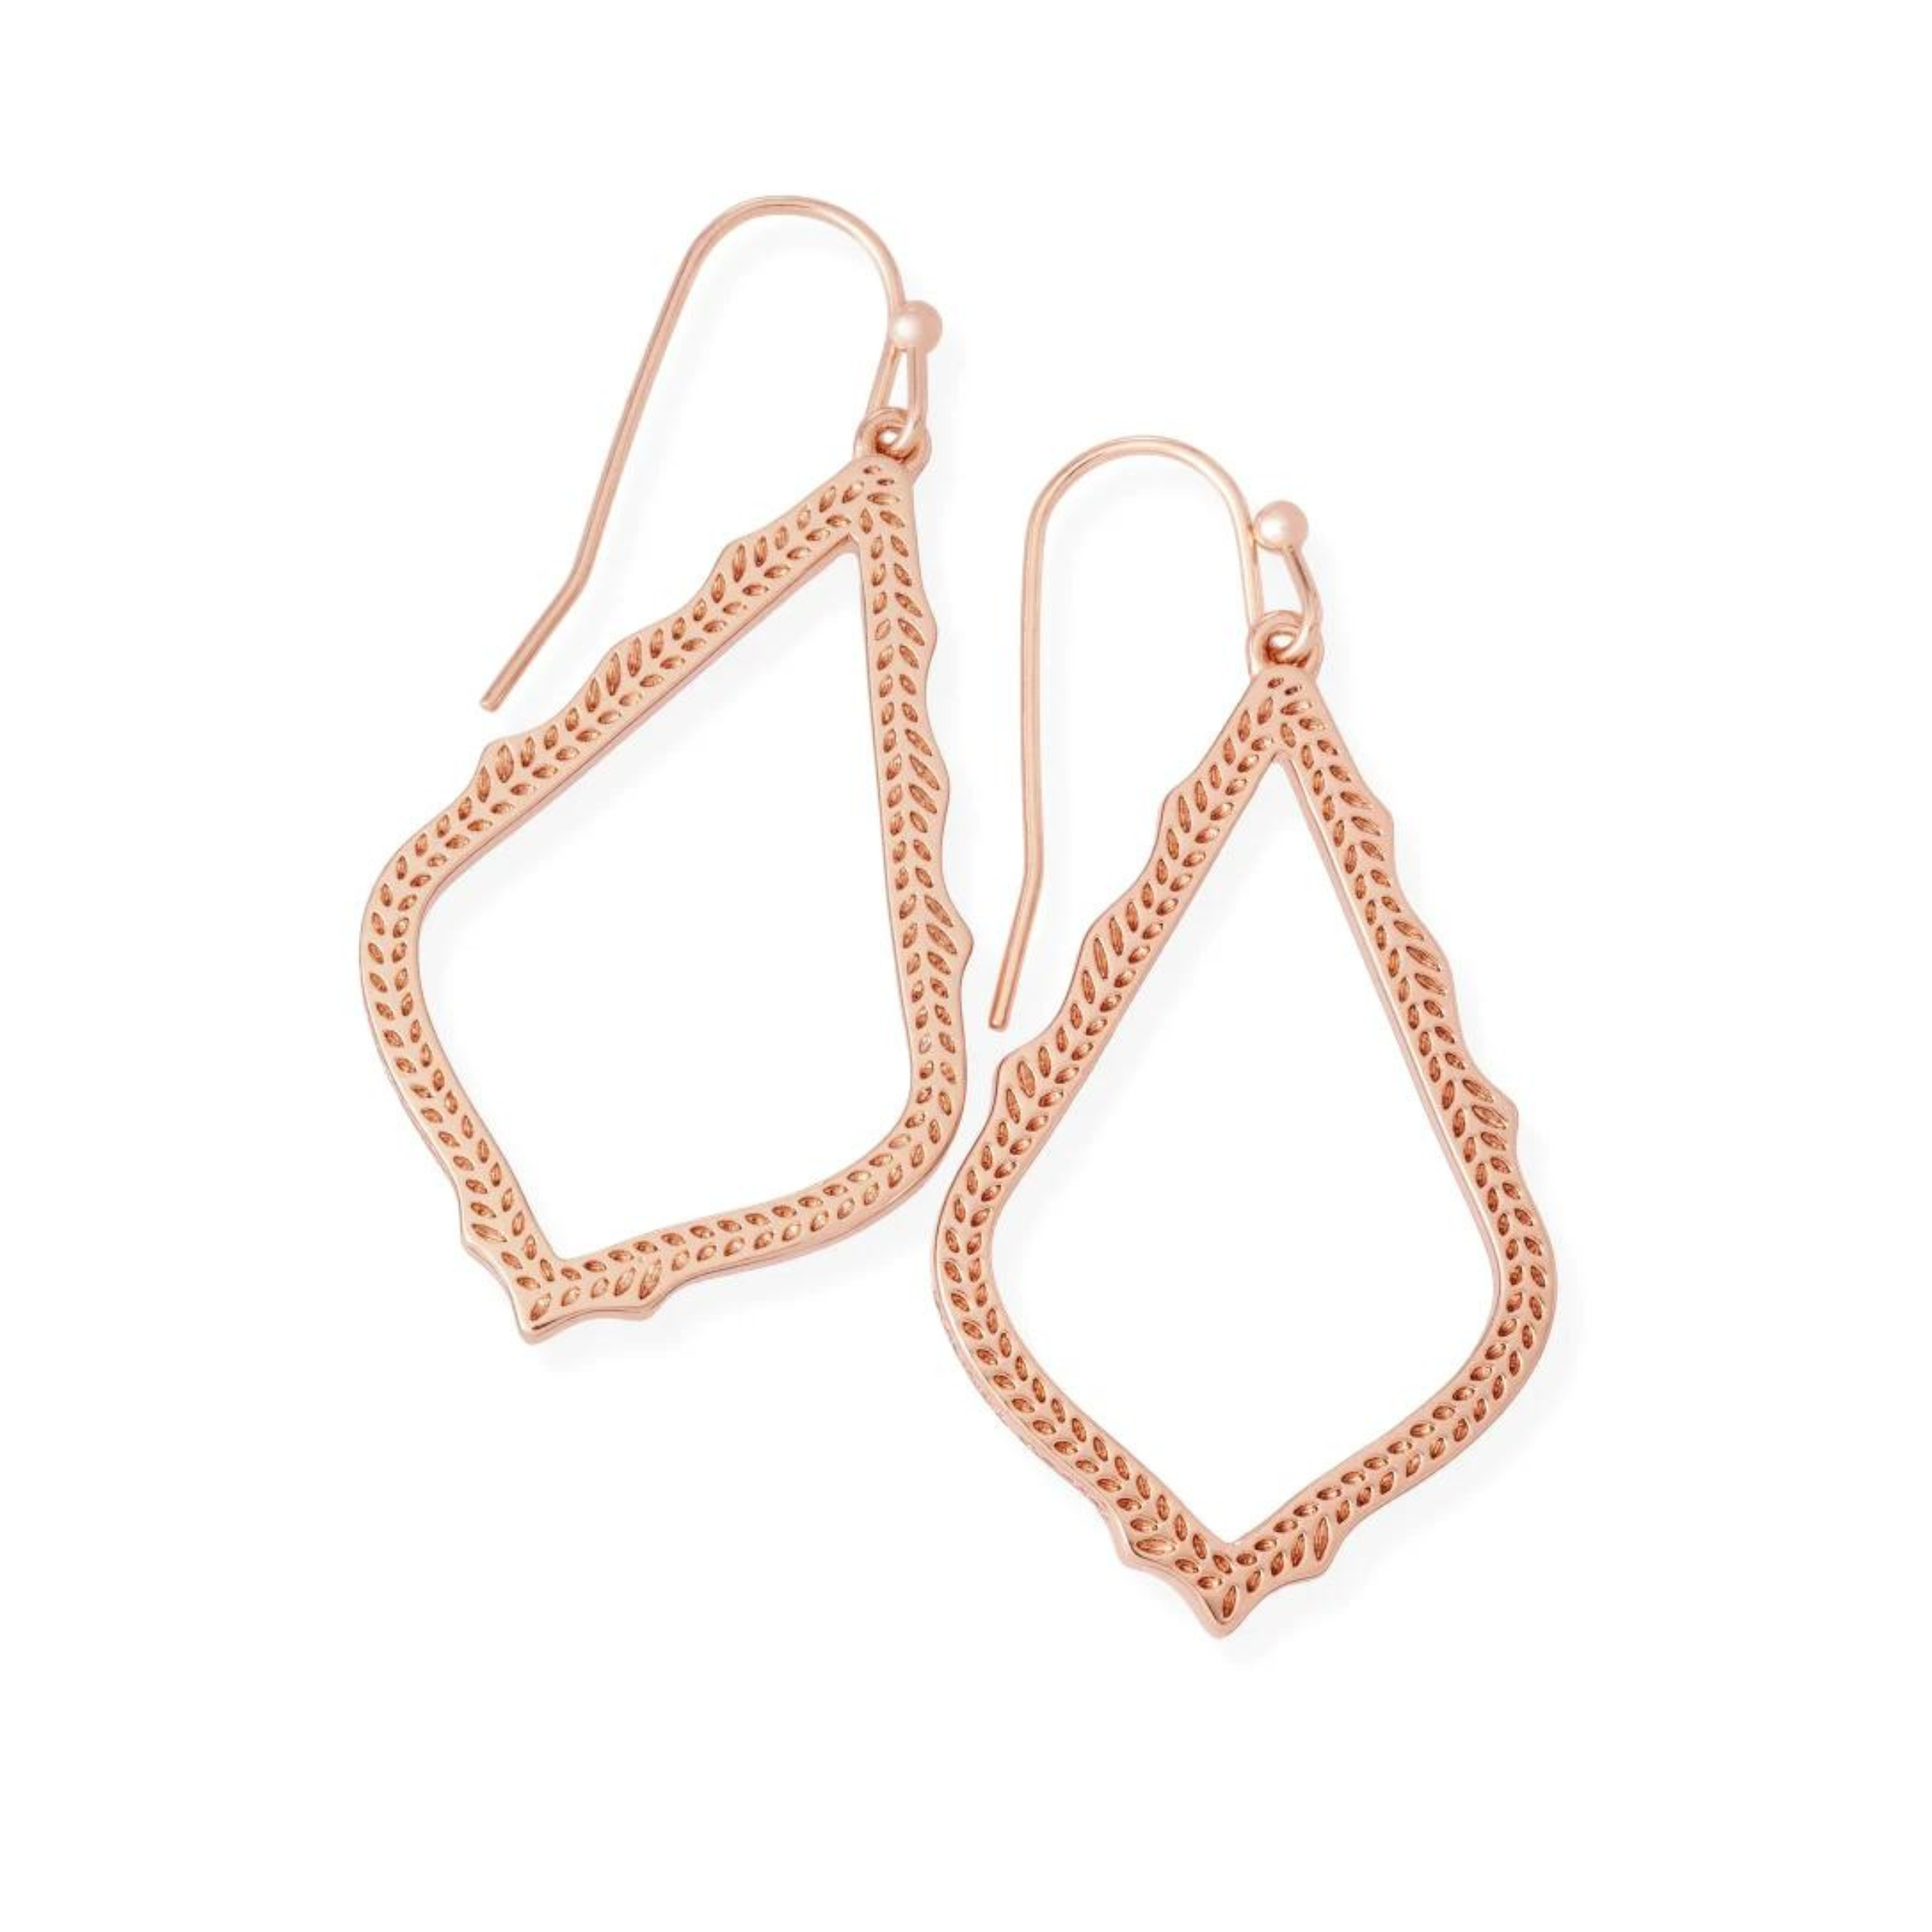 Rose gold dangle earrings, pictured on a white background.